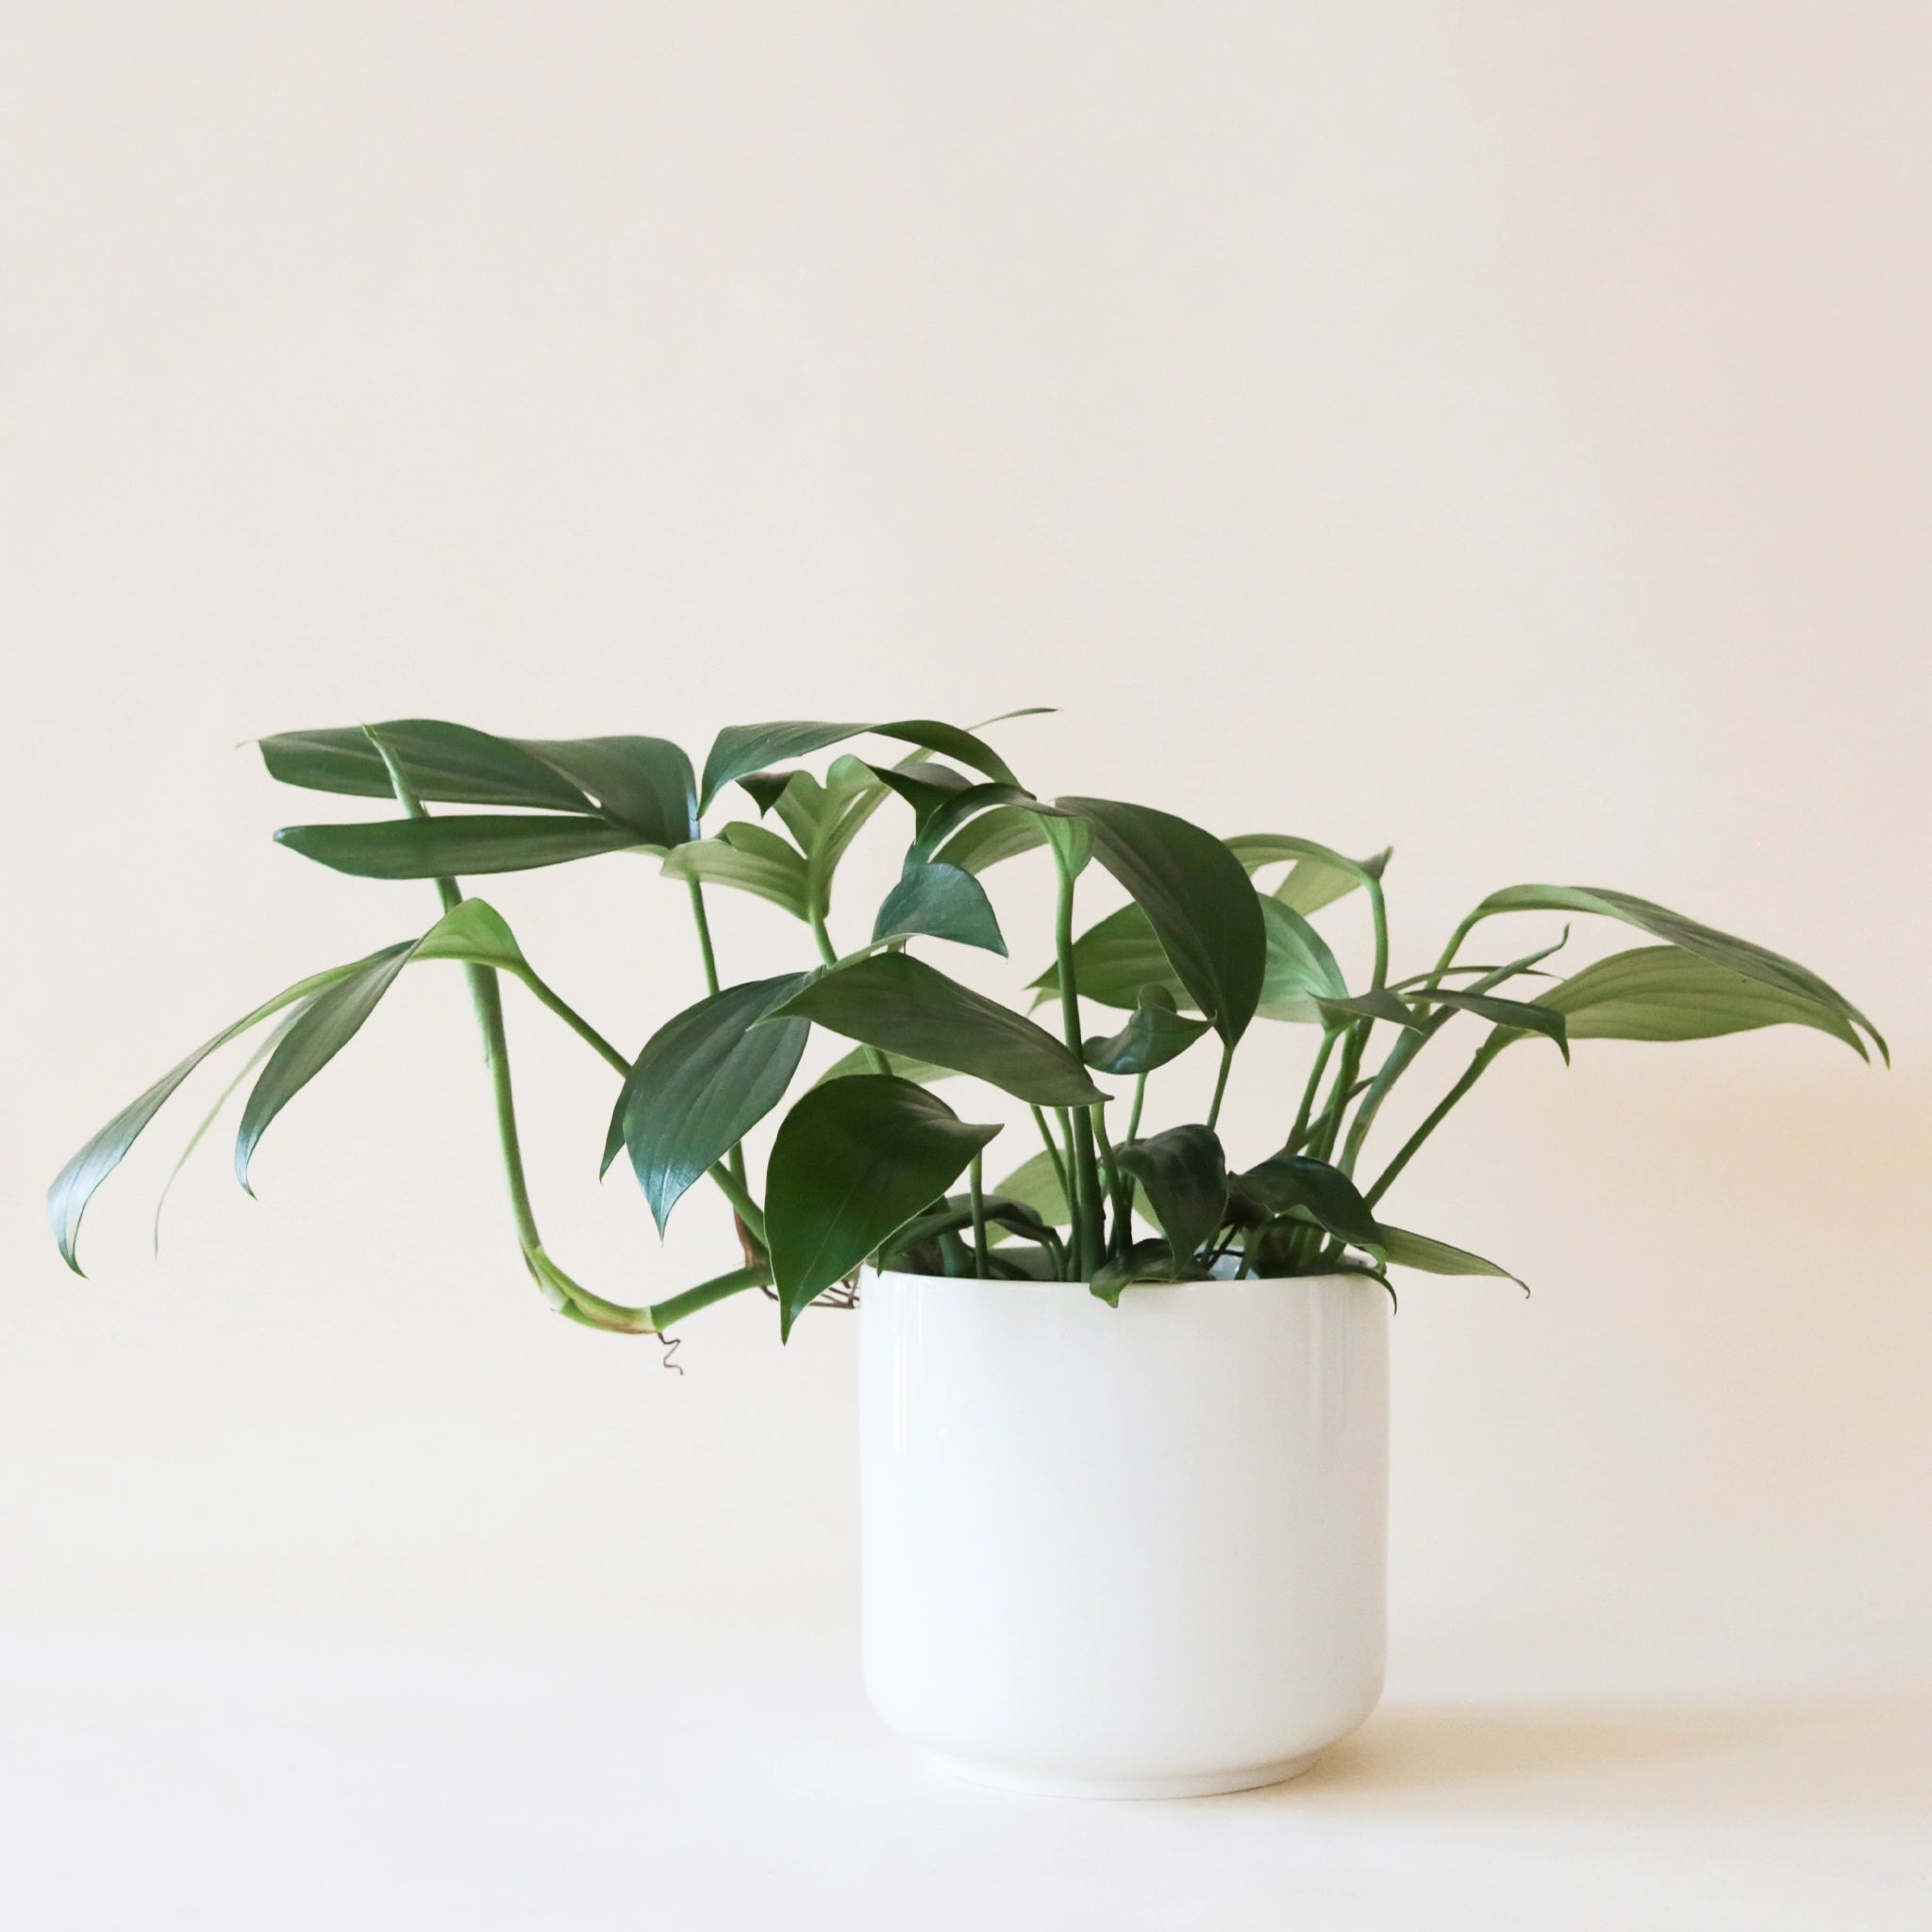 a plant with long dark green leaves sits in a white pot